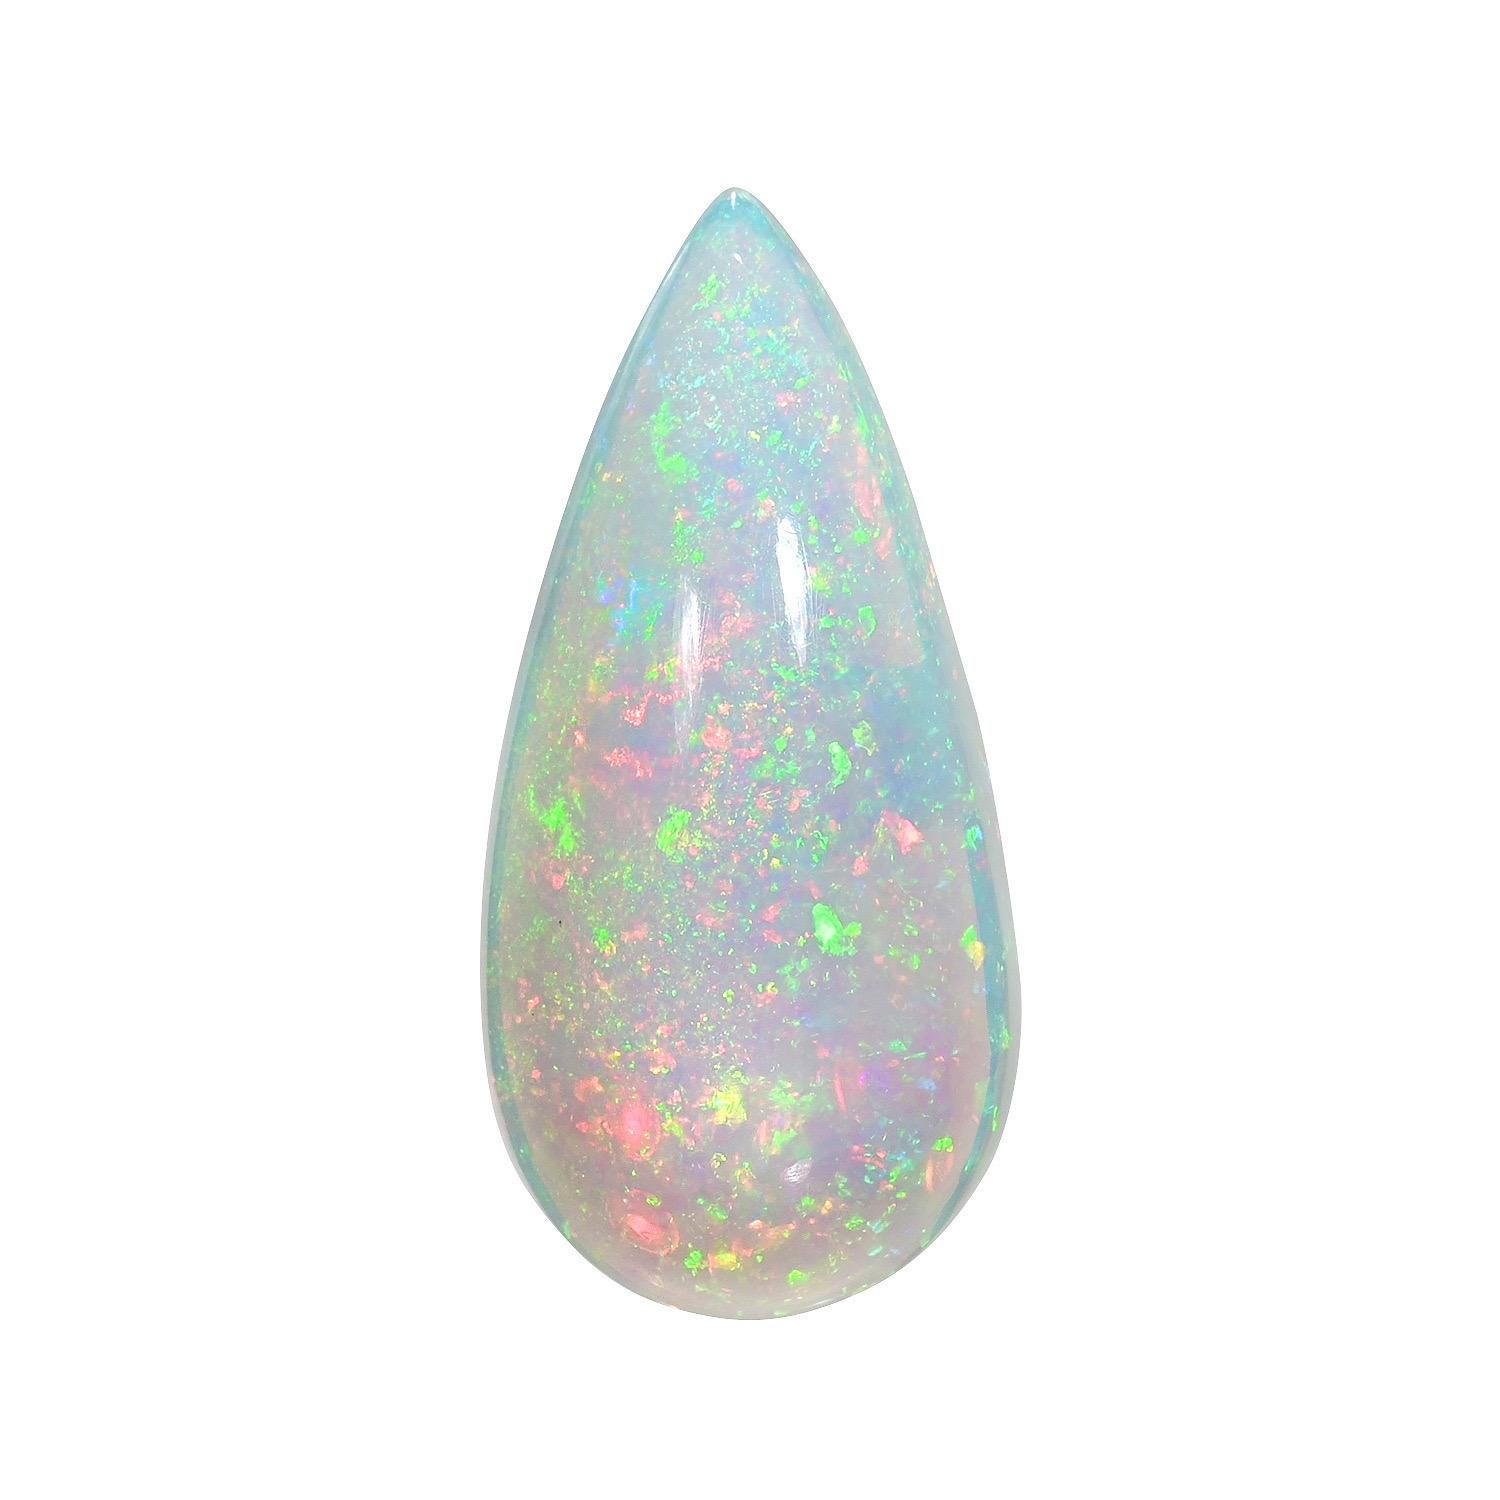 Natural 19.50 carat pear shape Ethiopian Opal loose gemstone, offered unmounted to an exclusive gem connoisseur.
Returns are accepted and paid by us within 7 days of delivery.
We offer supreme custom jewelry work upon request. Please contact us for